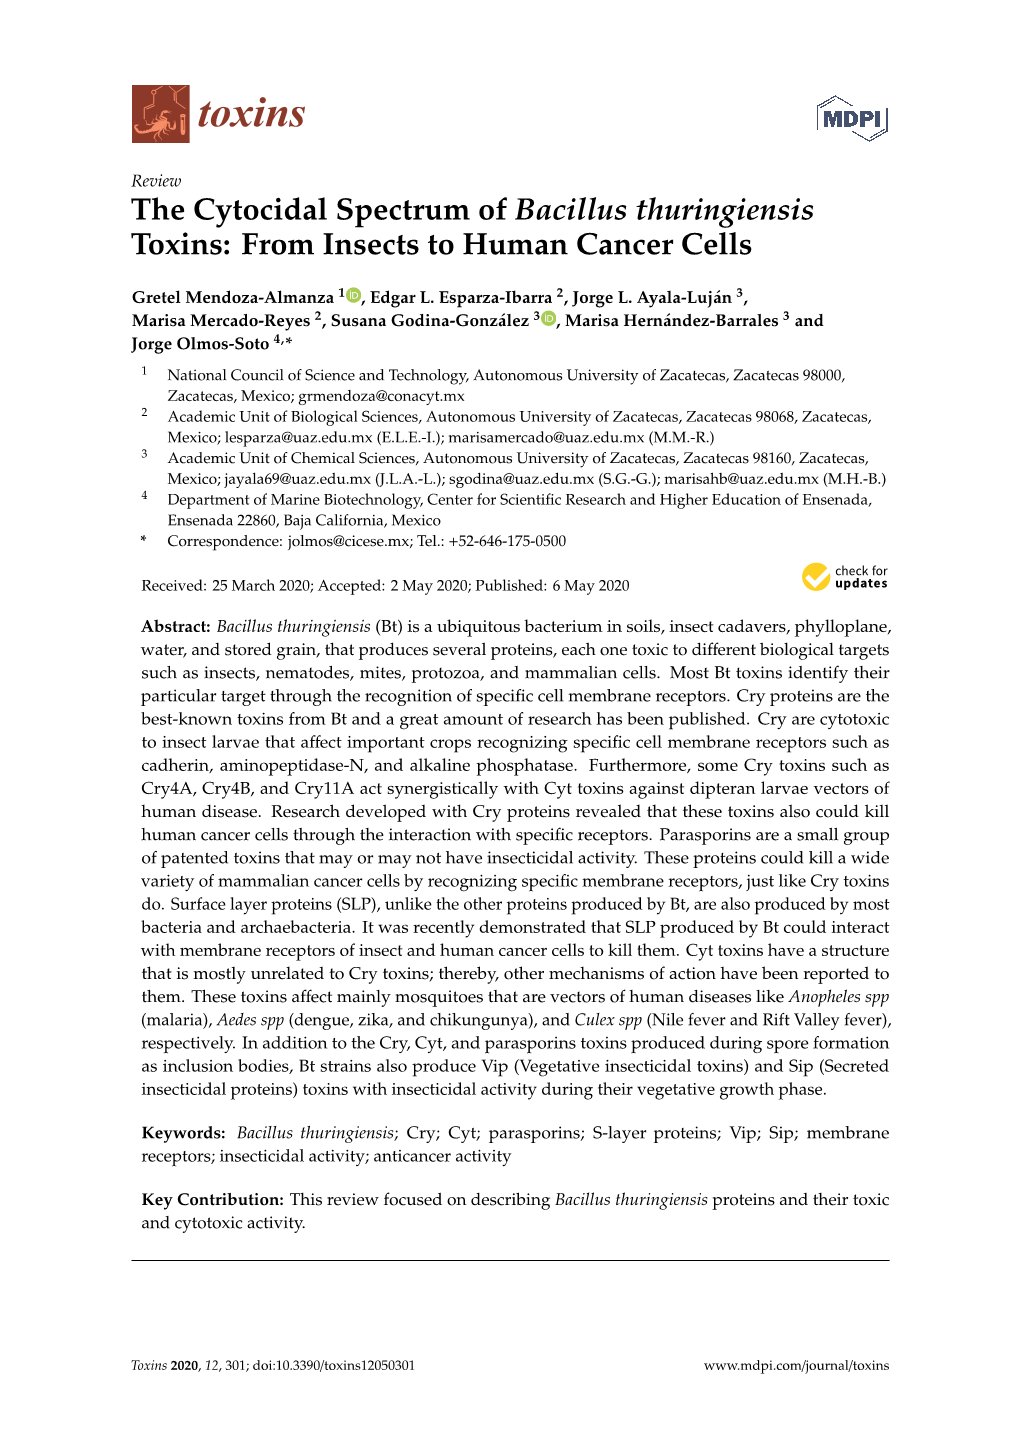 The Cytocidal Spectrum of Bacillus Thuringiensis Toxins: from Insects to Human Cancer Cells